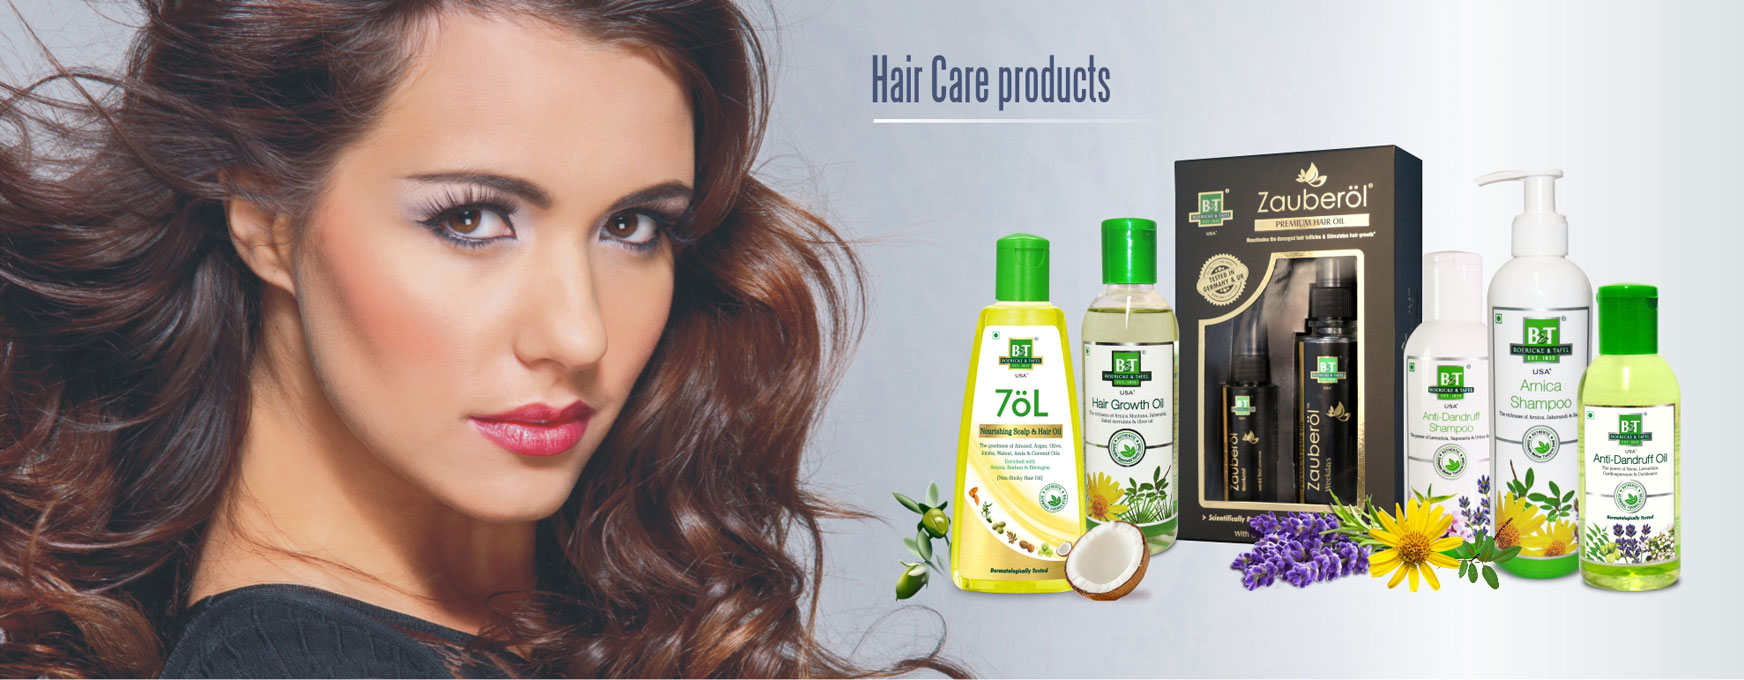 Buy Hair care products